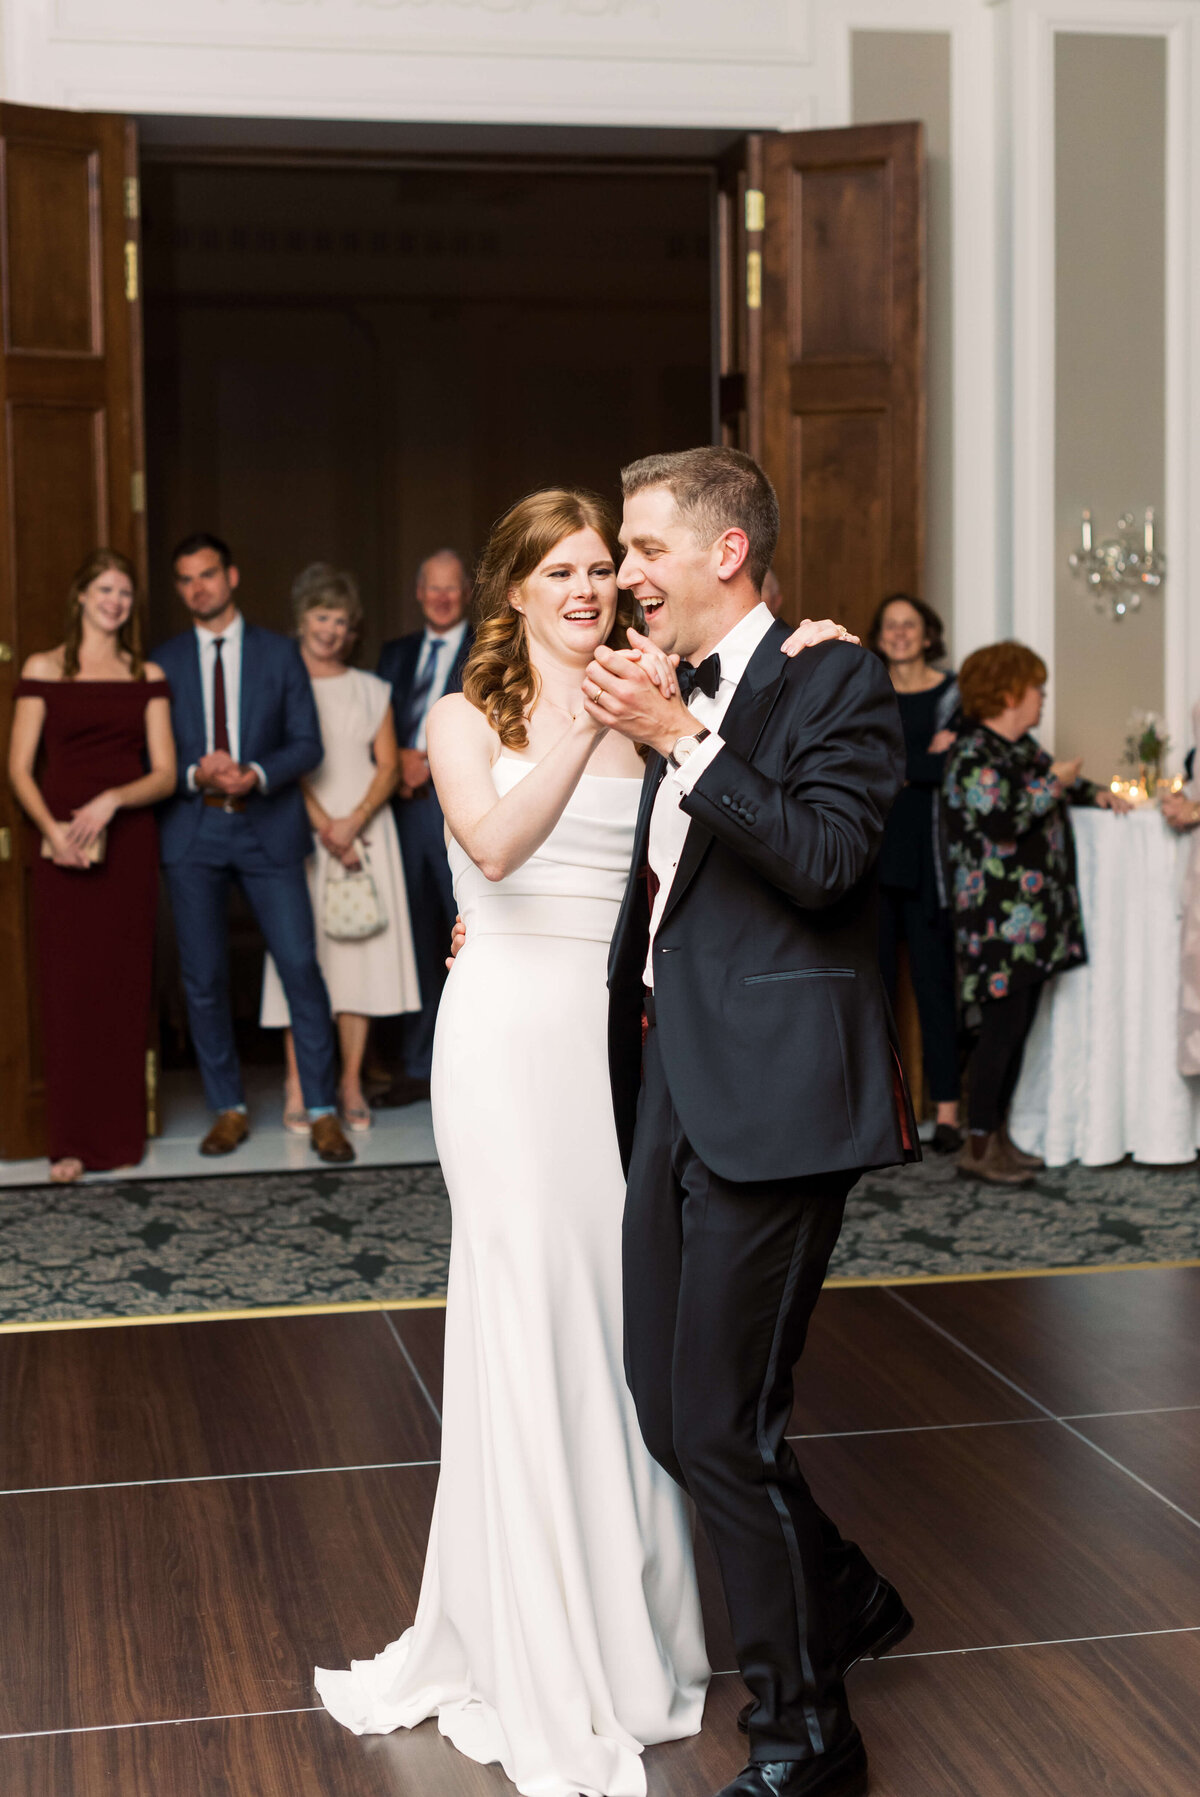 Bride and groom first dance at Lord Nelson Hotel Wedding, in Halifax, Nova Scotia